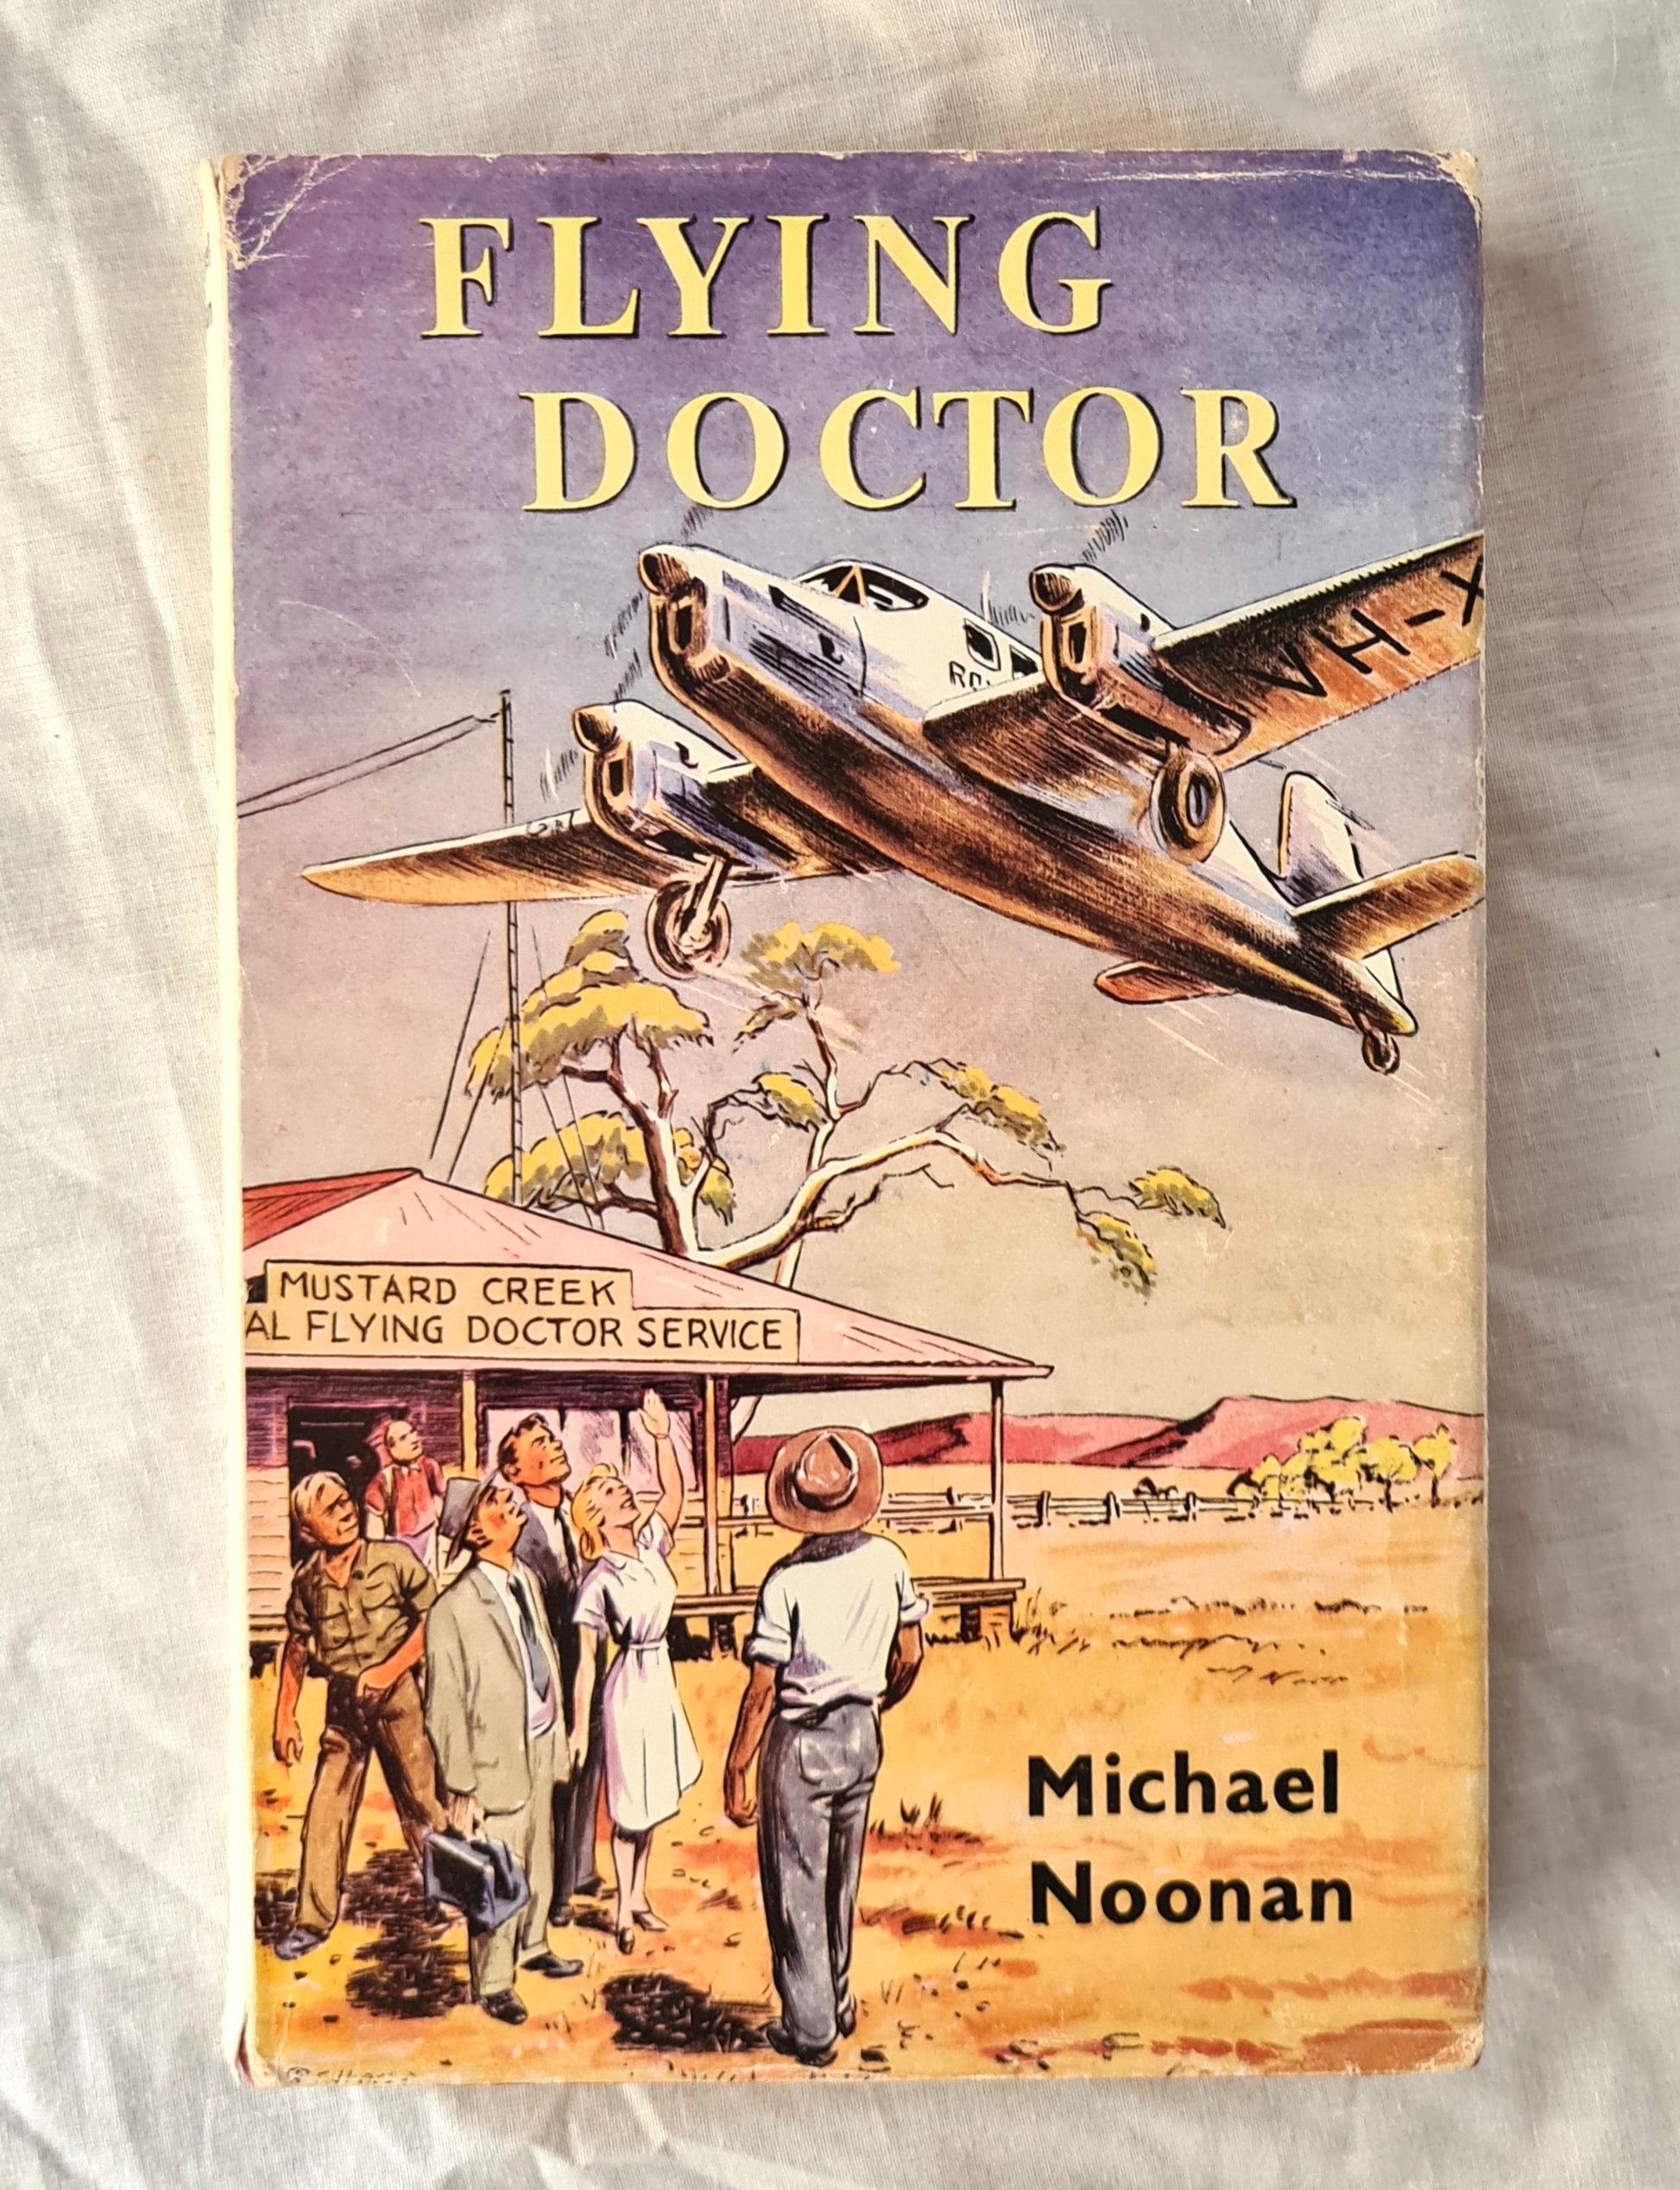 Flying Doctor  by Michael Noonan  Illustrated by R. E. Hicks